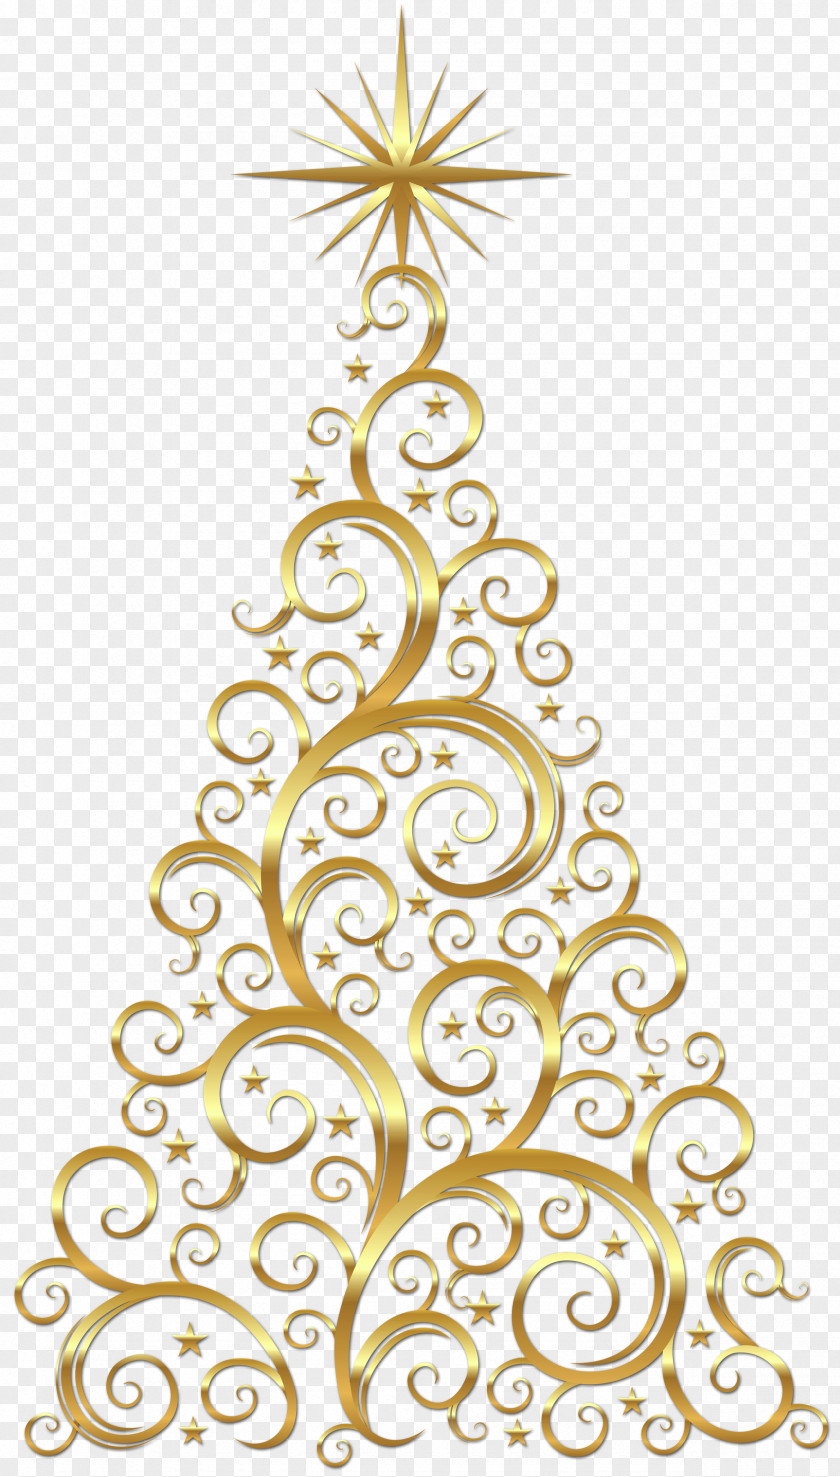 Transparent Gold Deco Christmas Tree Clipart PNG